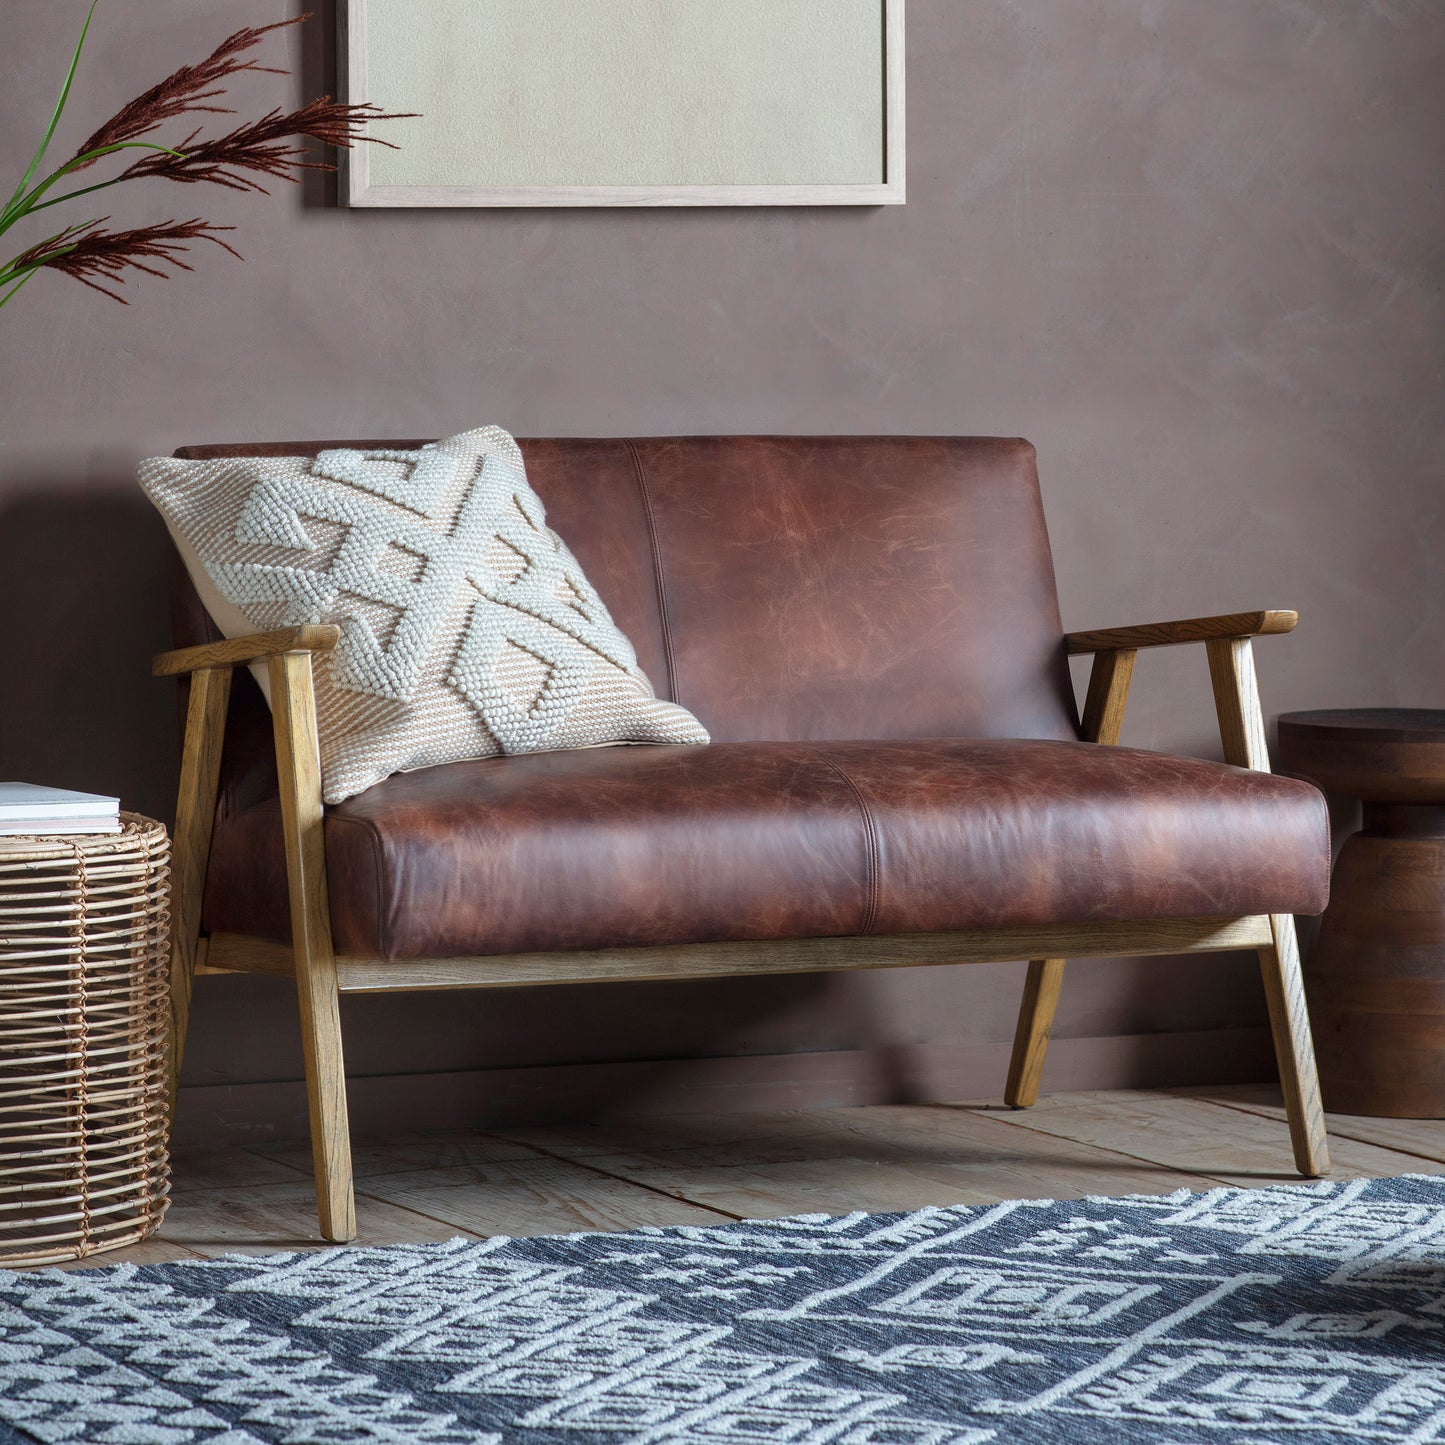 A vintage brown leather Neyland 2 Seater Sofa from Kikiathome.co.uk enhances interior decor in front of a brown wall.